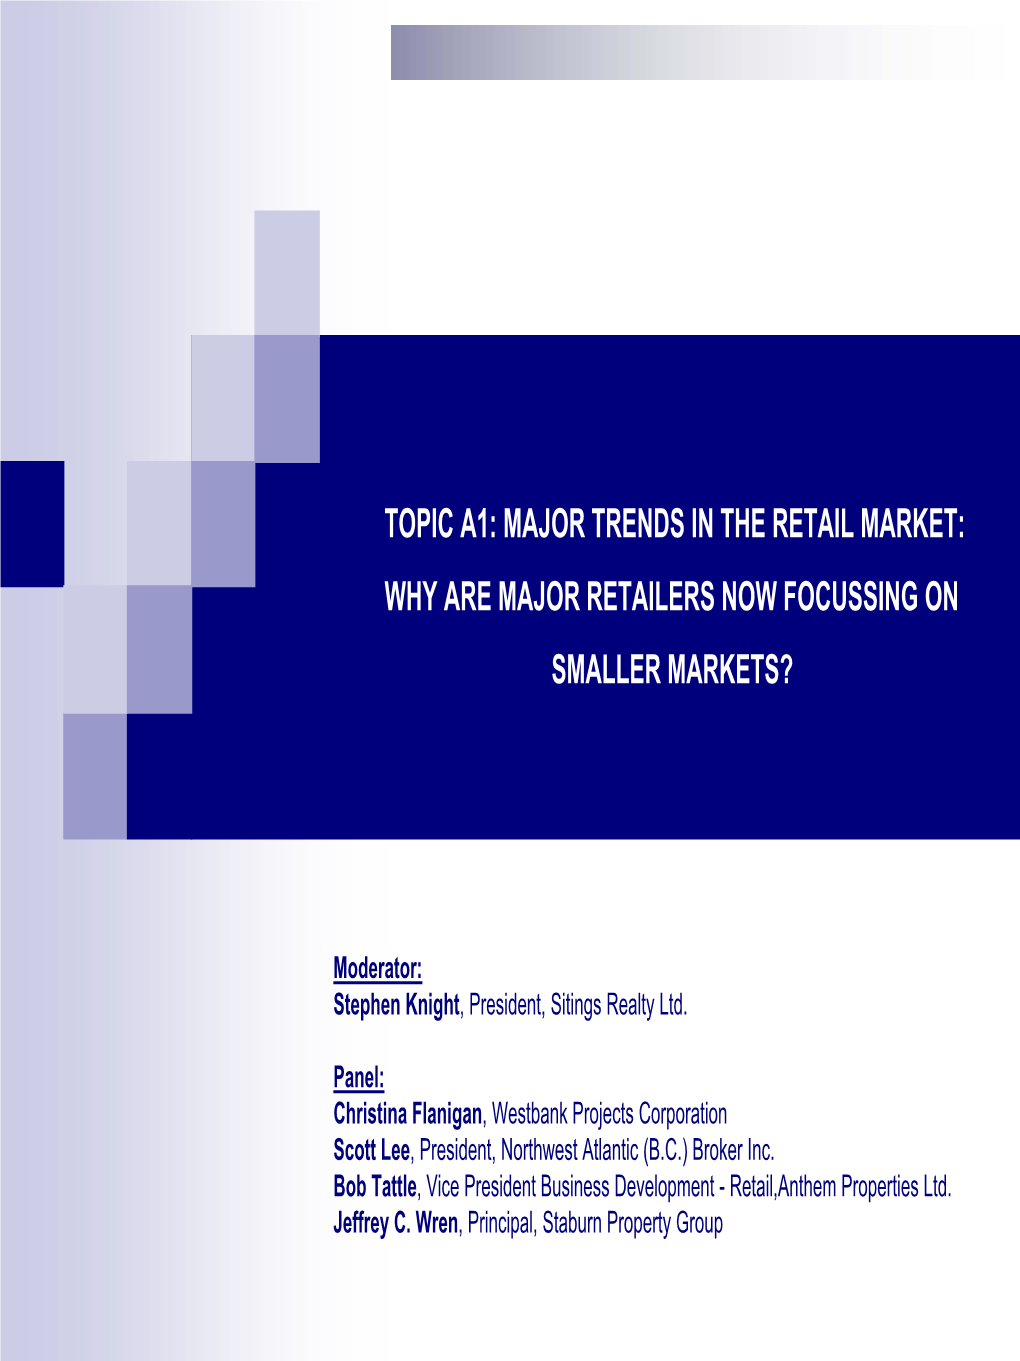 Topic A1: Major Trends in the Retail Market: Why Are Major Retailers Now Focussing on Smaller Markets?